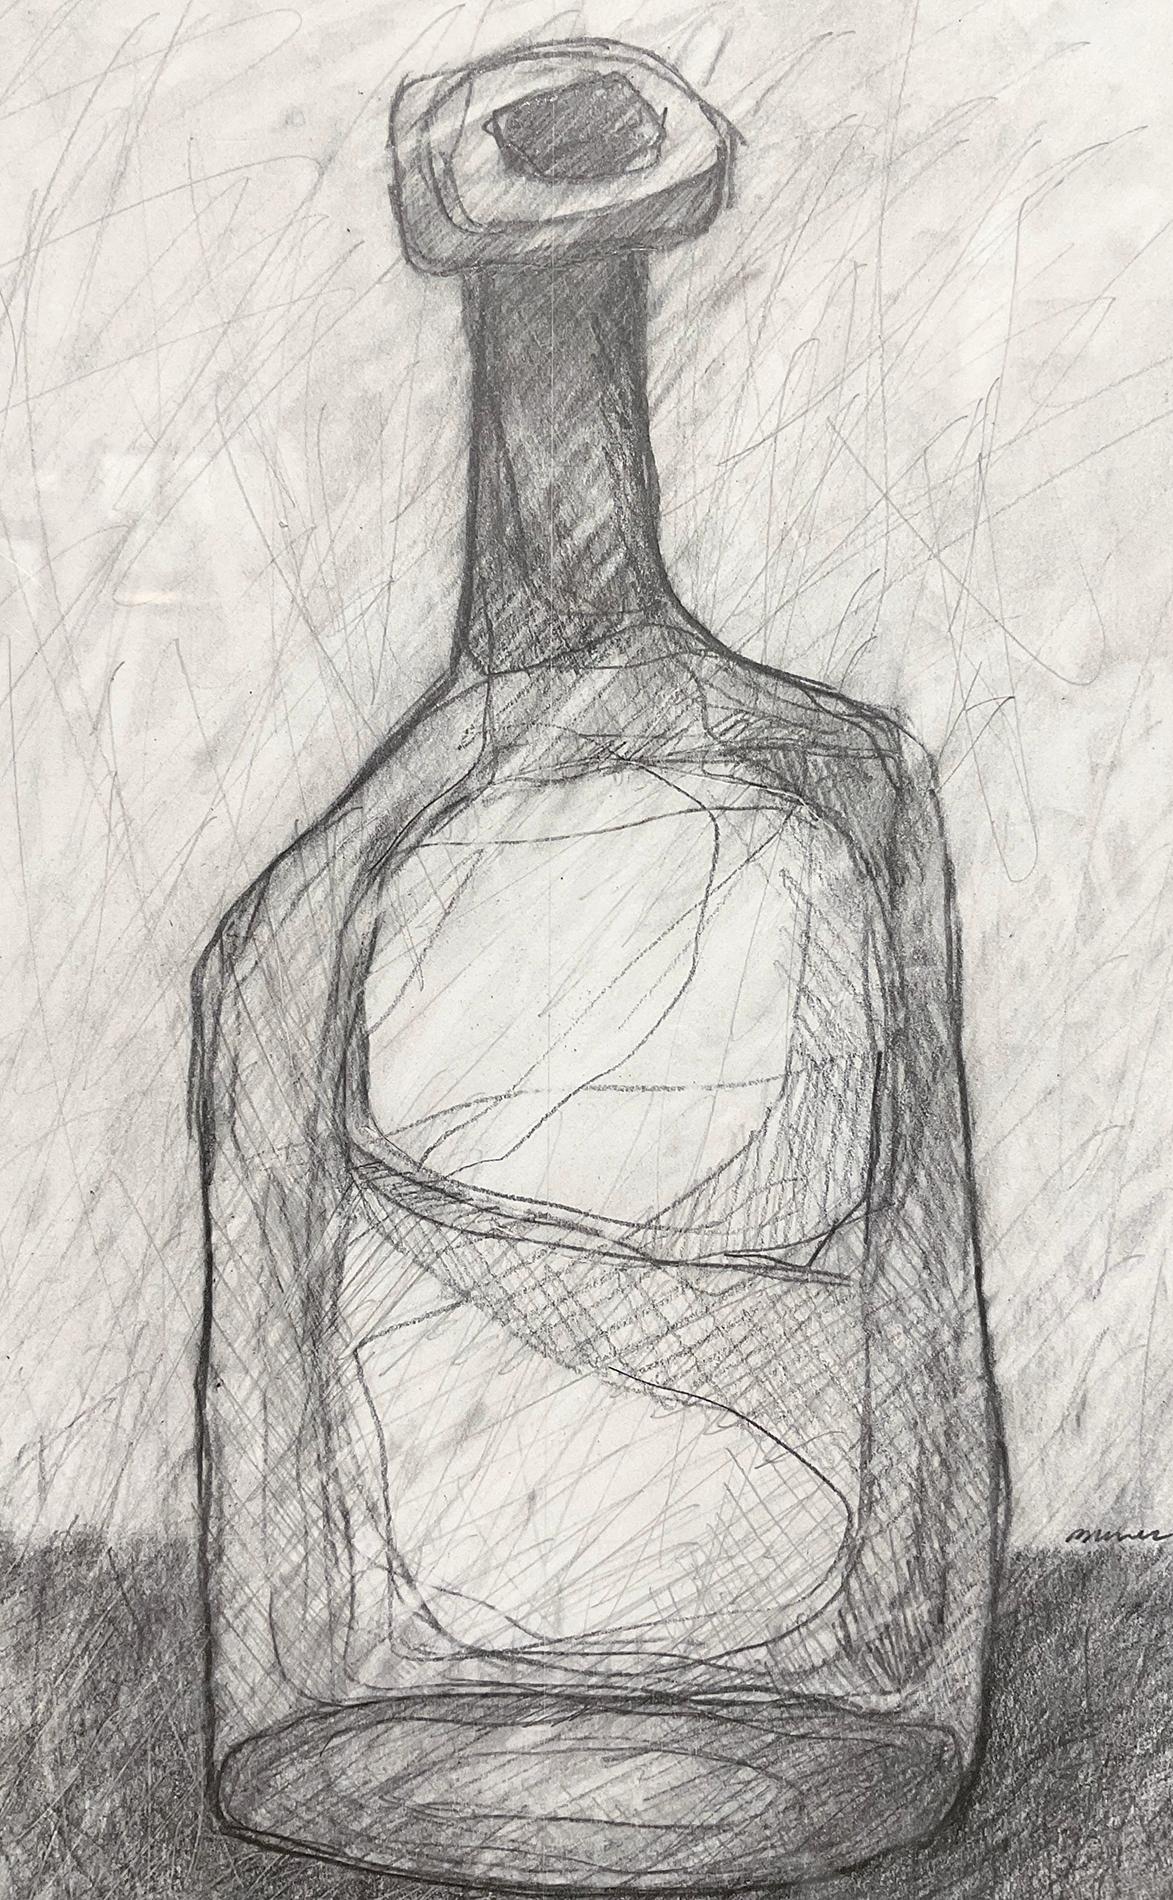 Single Bottle II: Abstract Cubist Style Morandi Bottle Still Life Pencil Drawing - Black Abstract Drawing by David Dew Bruner